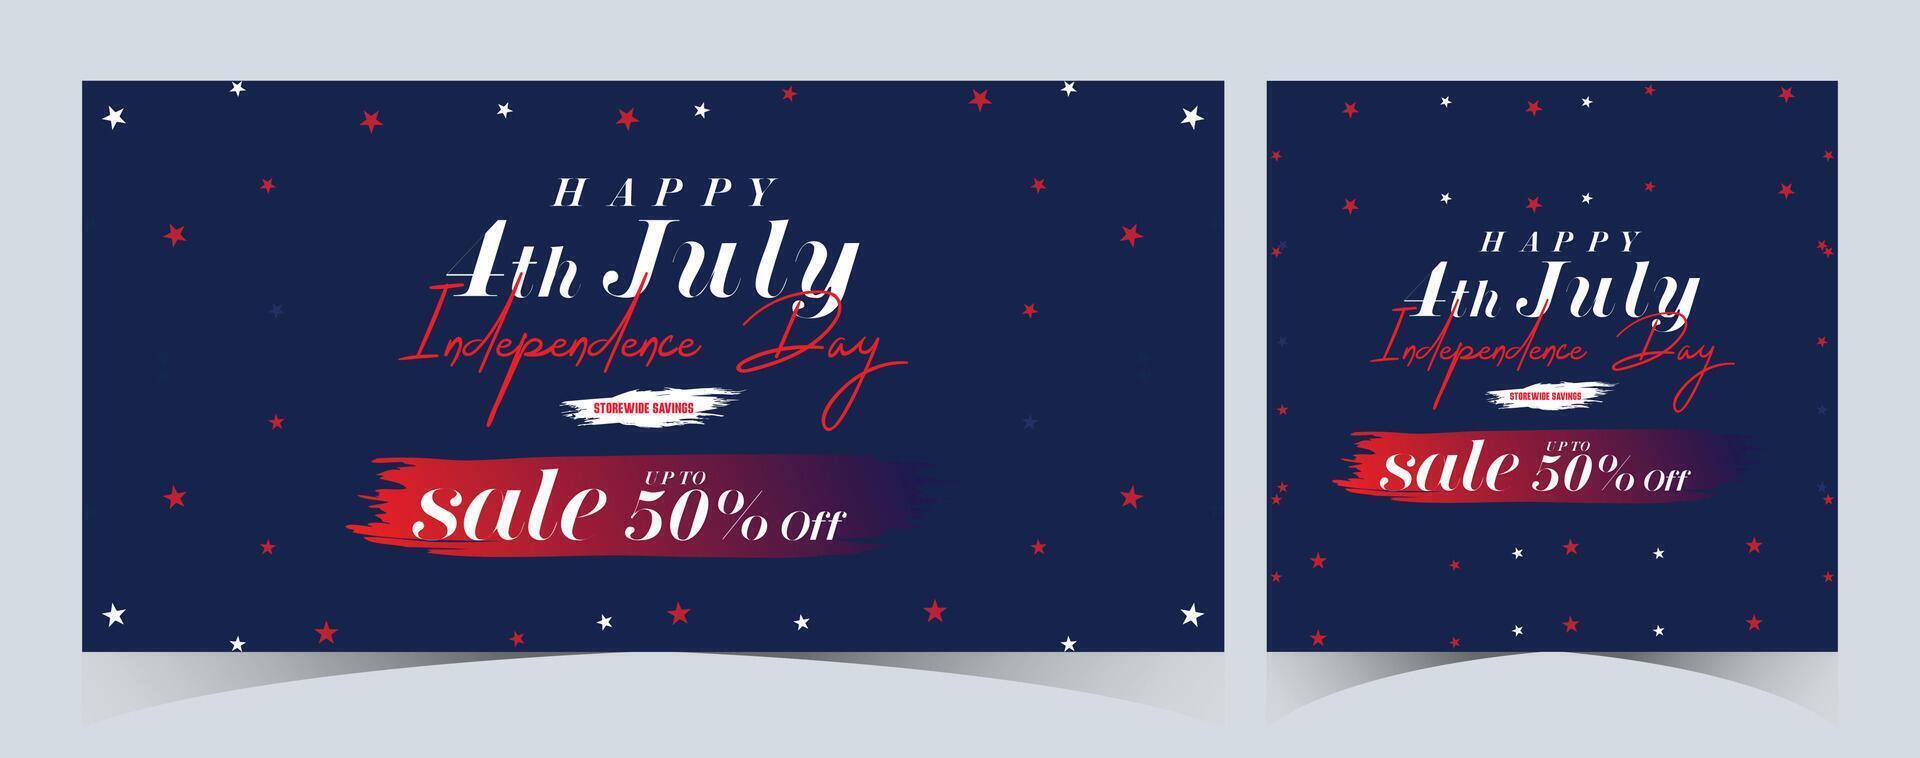 Set of Happy 4th of July. Fourth July Independence Day USA. Independence Day sale web banner. Independence Day USA social media promotion template. greeting card, poster with United States flag vector